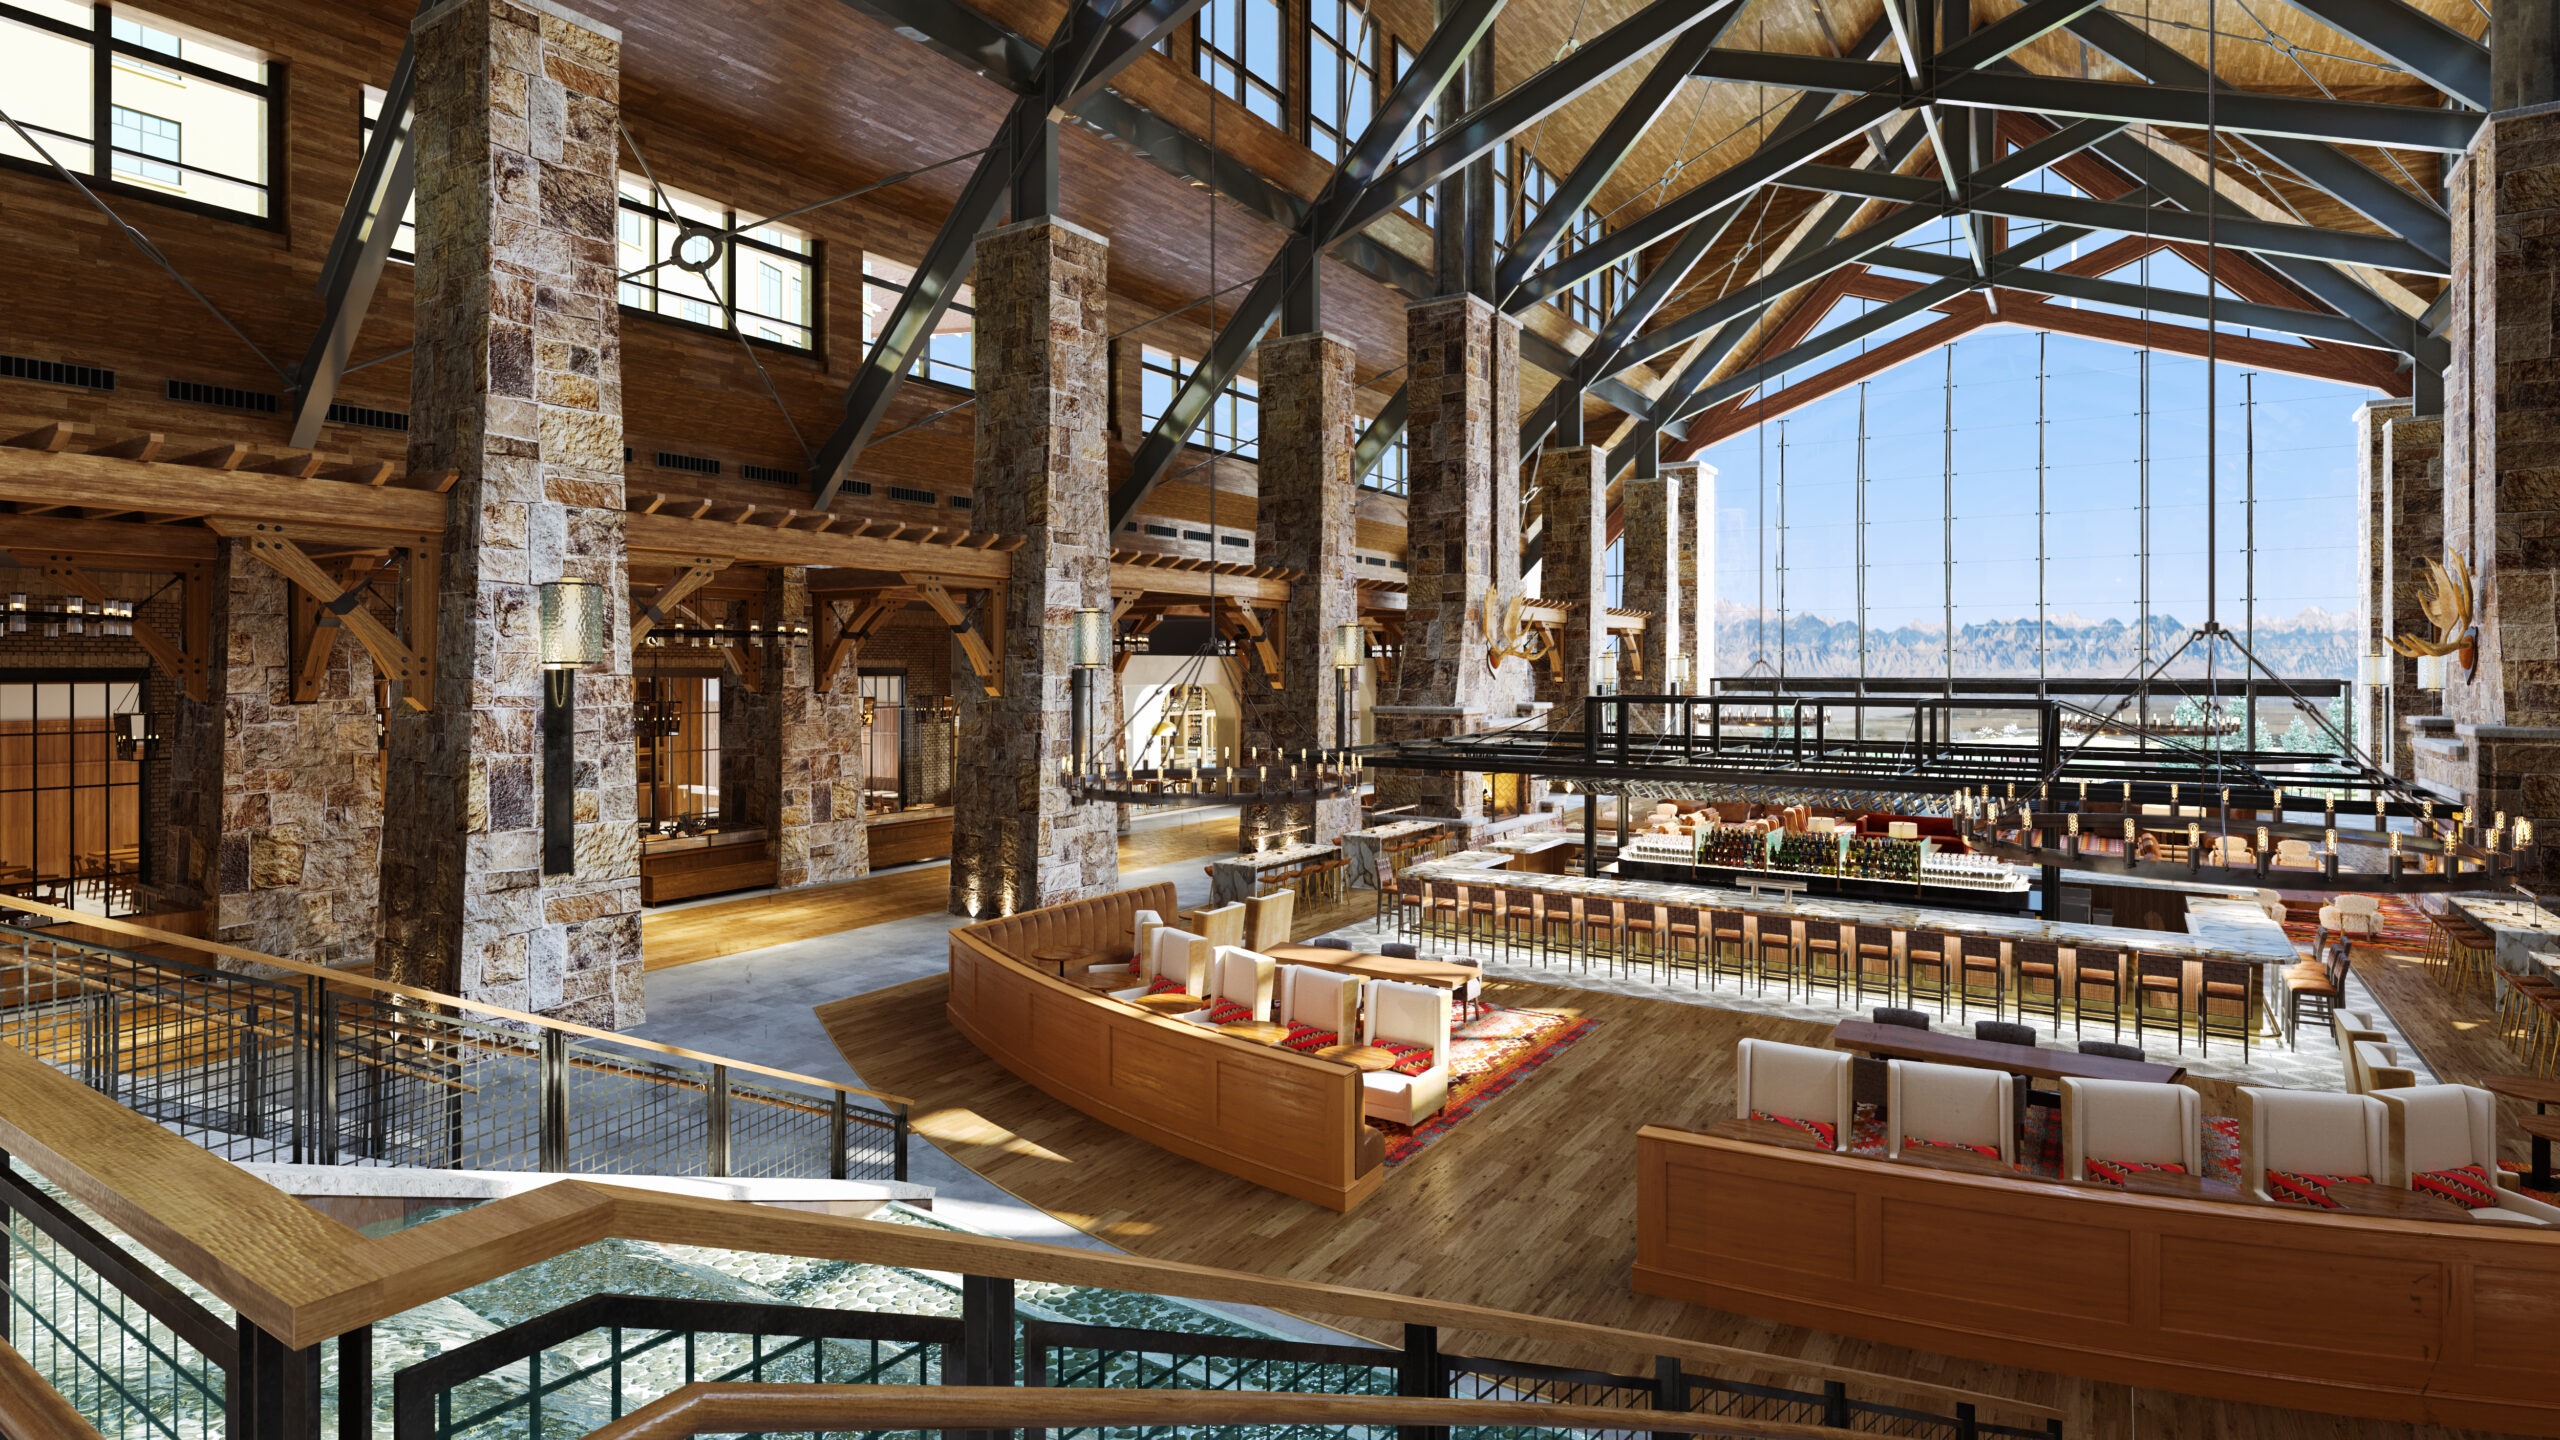 A rendering of the new and renovated Grand Lodge at Gaylord Rockies